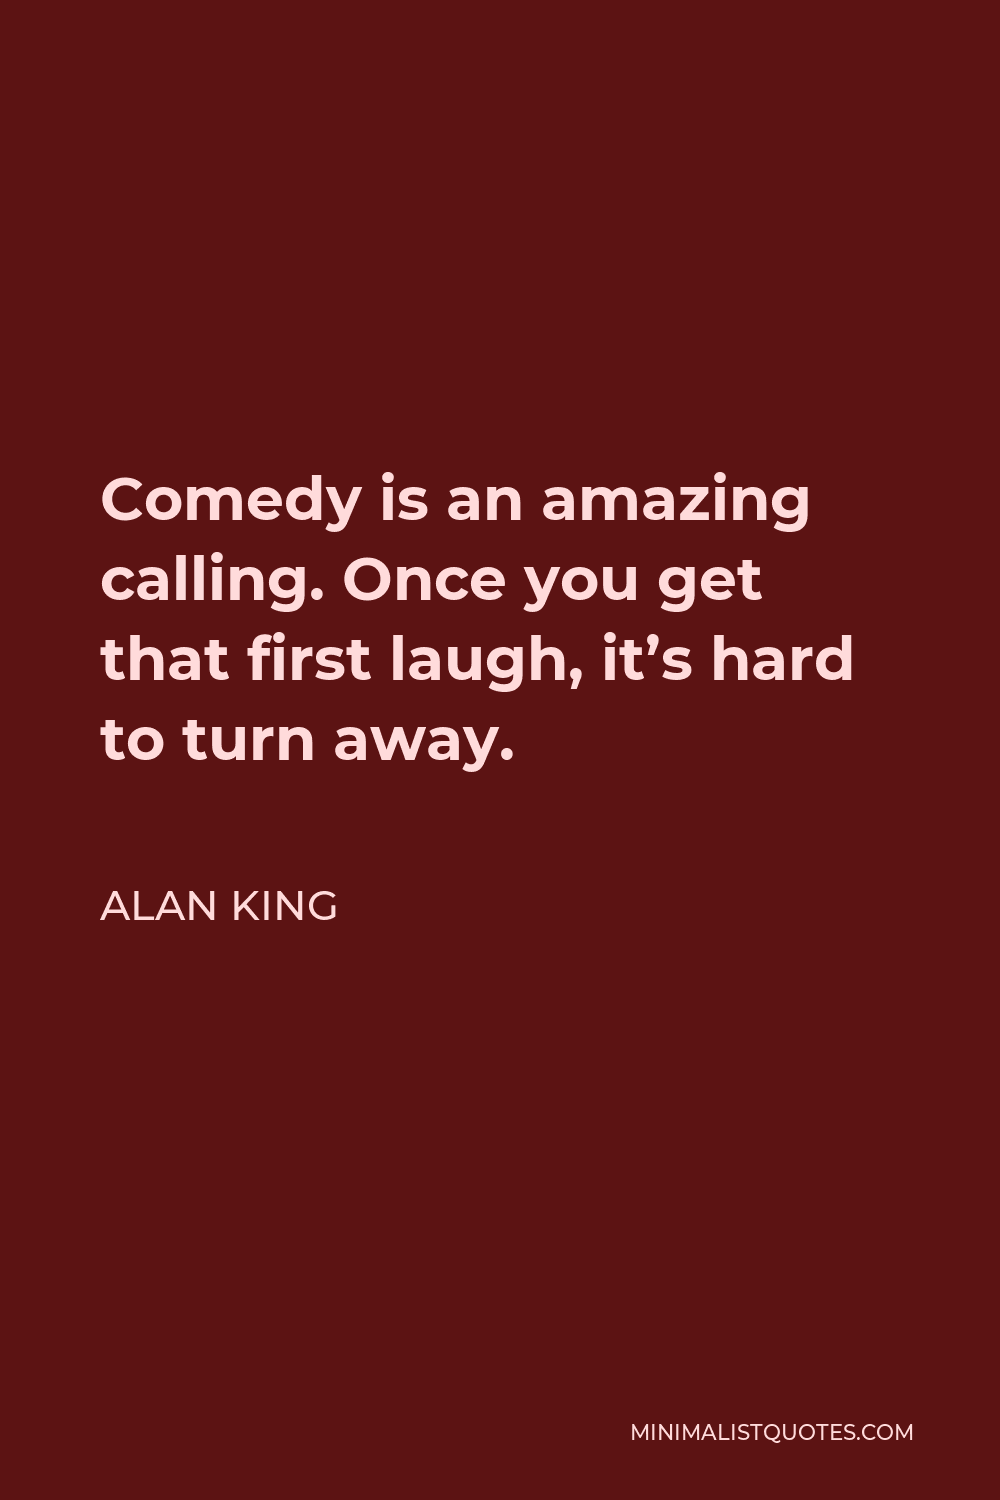 Alan King Quote - Comedy is an amazing calling. Once you get that first laugh, it’s hard to turn away.